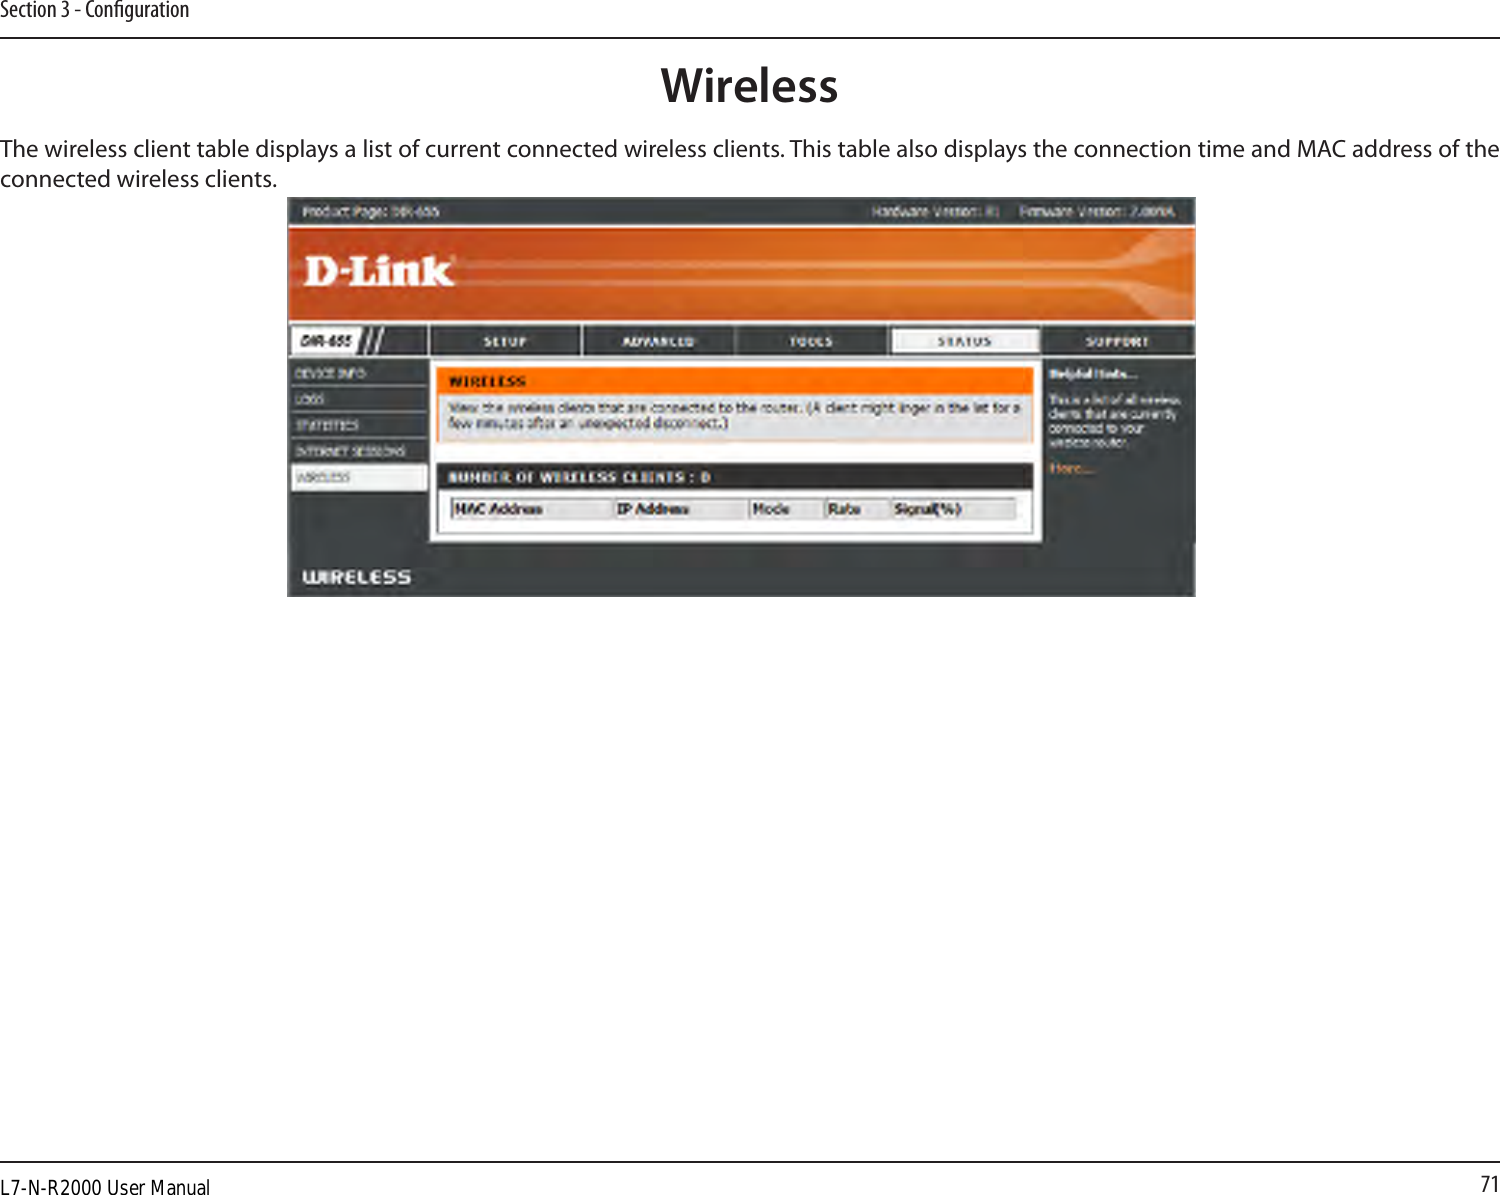 71Section 3 - CongurationThe wireless client table displays a list of current connected wireless clients. This table also displays the connection time and MAC address of the connected wireless clients.WirelessL7-N-R2000 User Manual